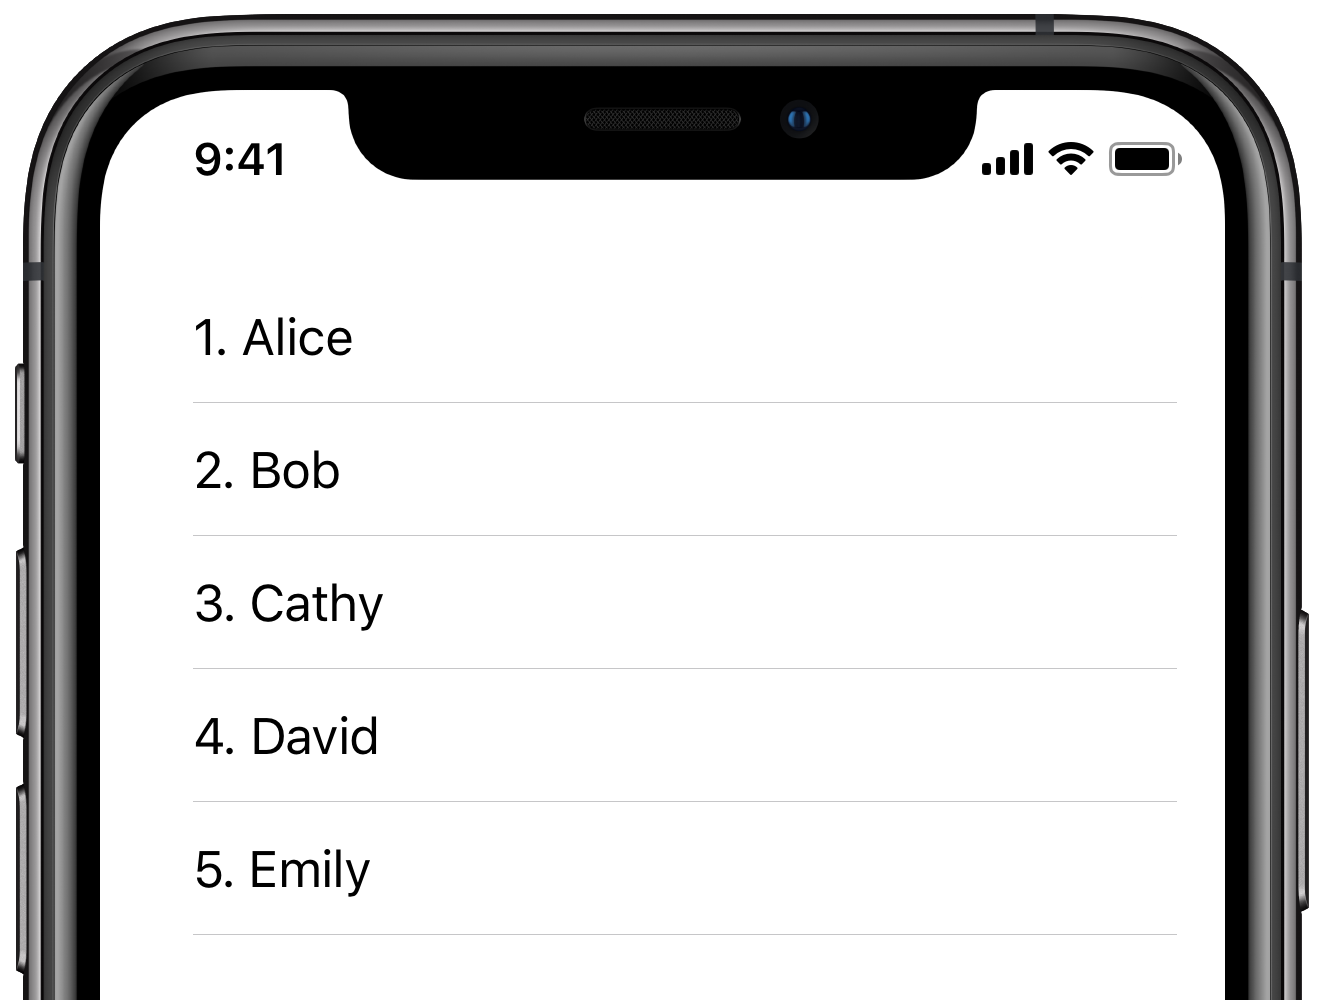 iPhone showing a numbered list of people